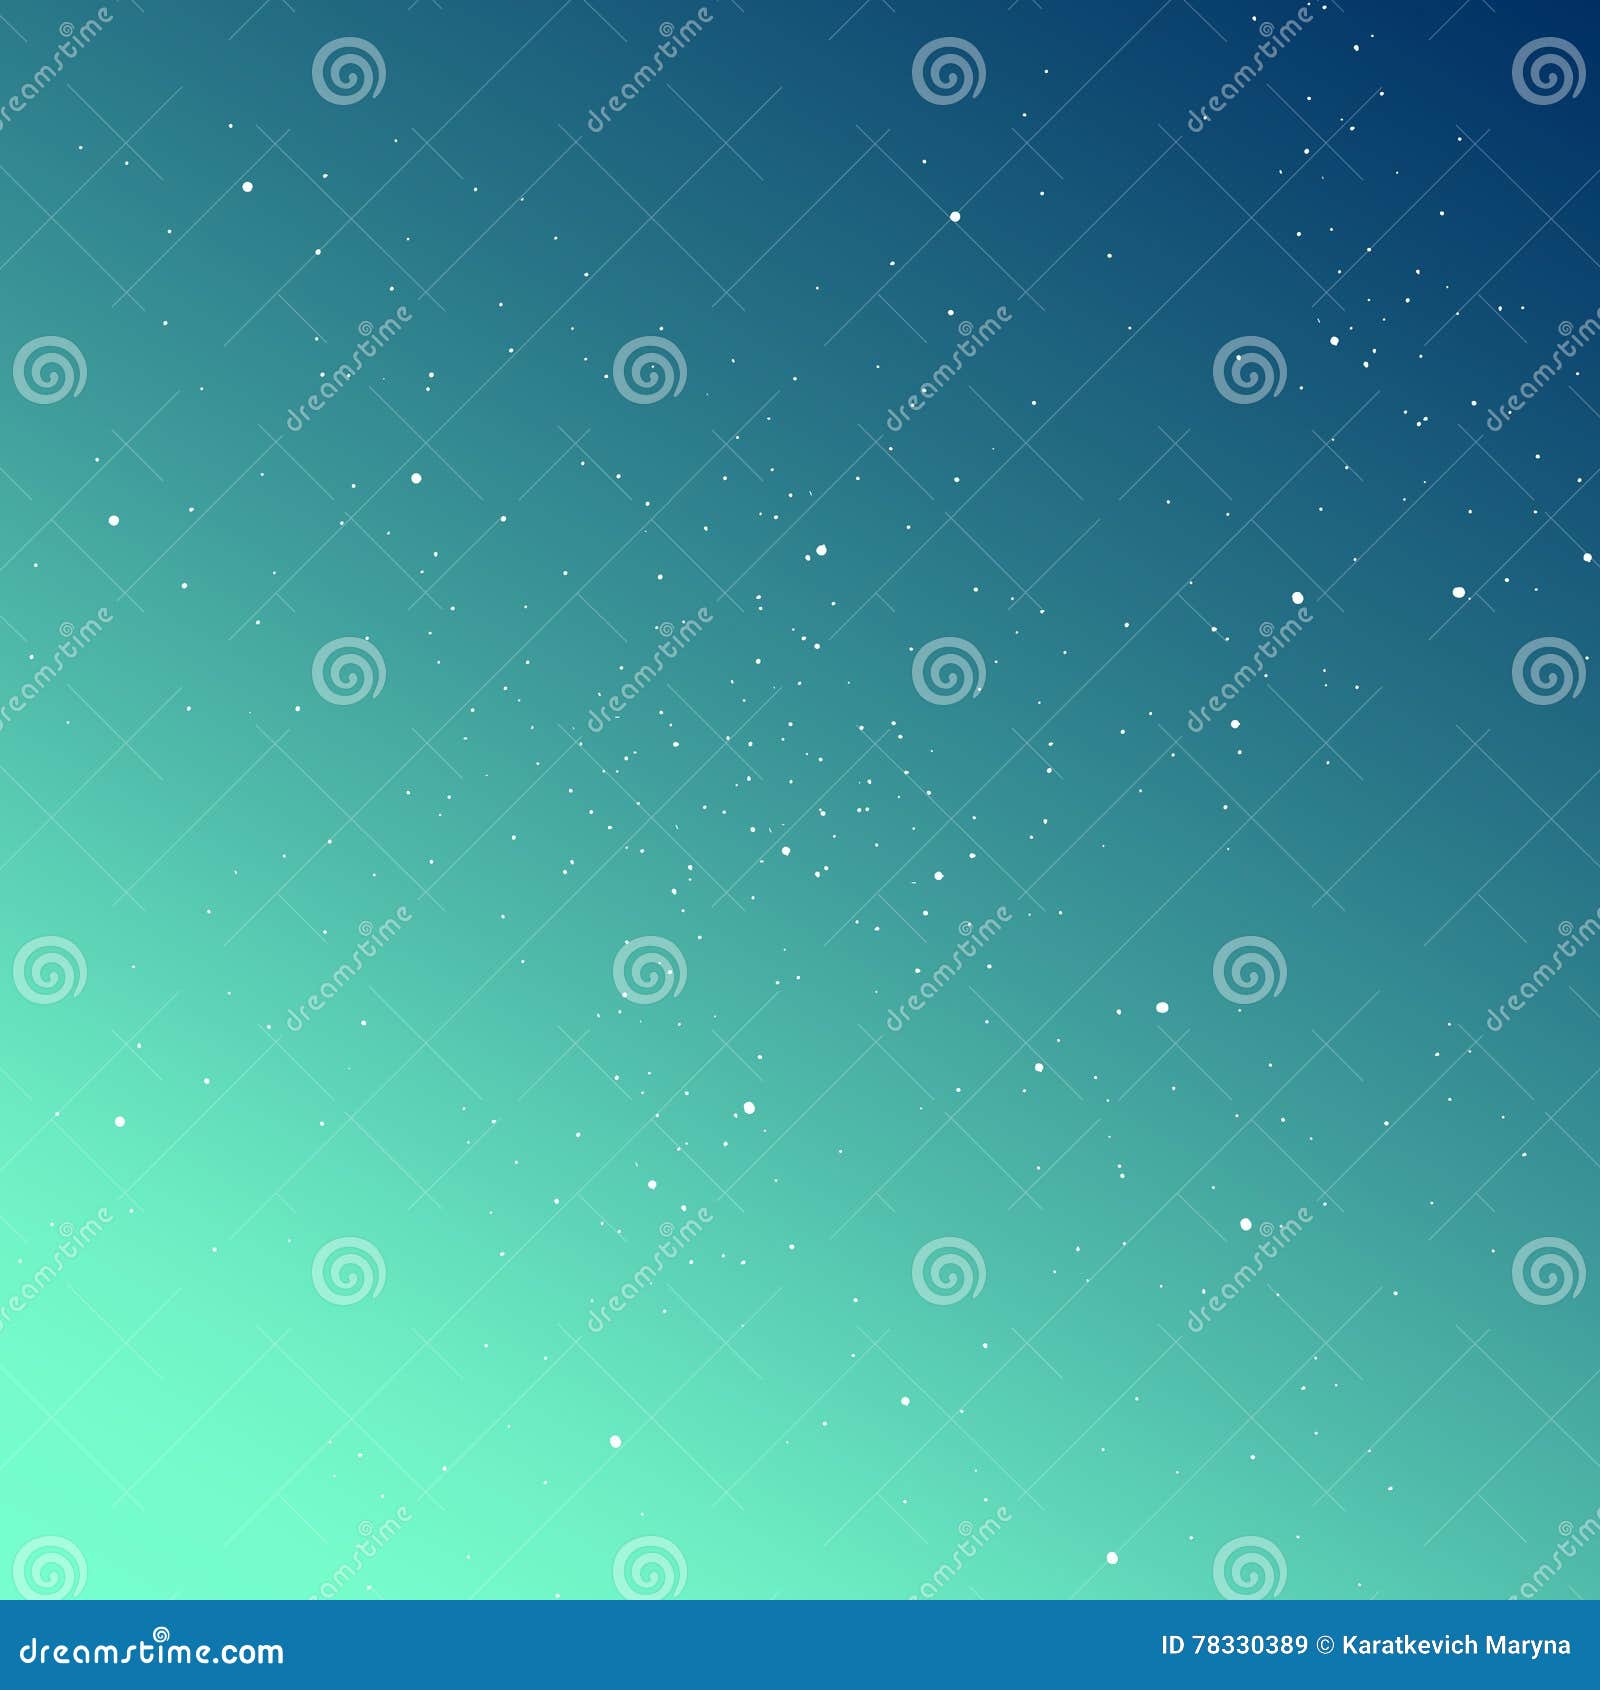 Gradient Sky with Stars Background. Stylish Solution for Your Design ...